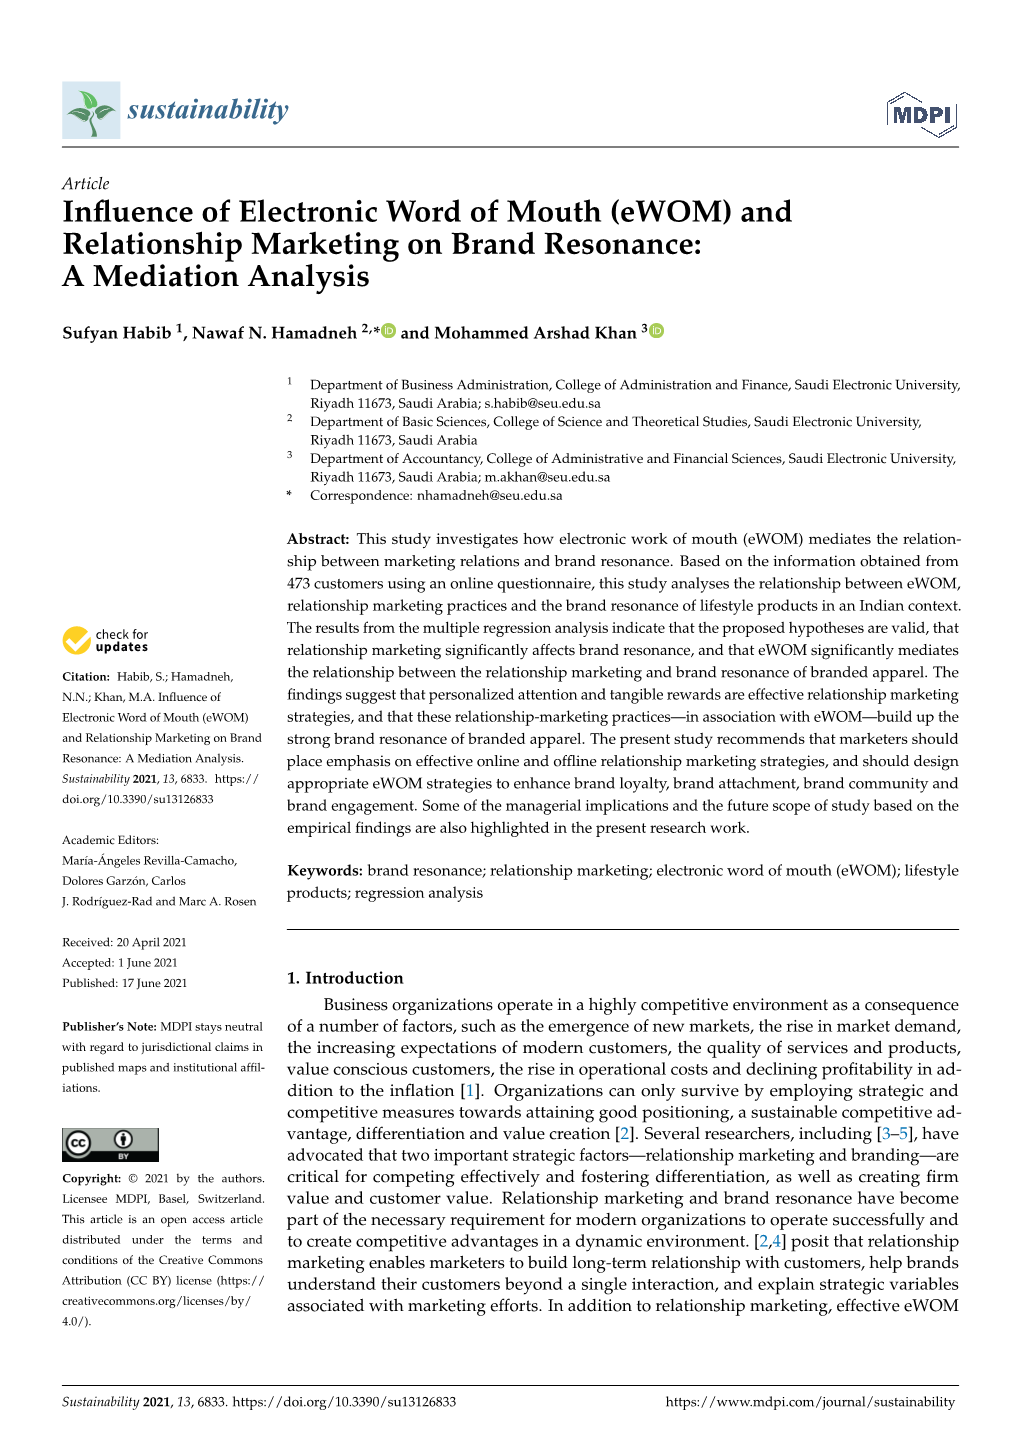 Influence of Electronic Word of Mouth (Ewom) and Relationship Marketing on Brand Resonance: a Mediation Analysis